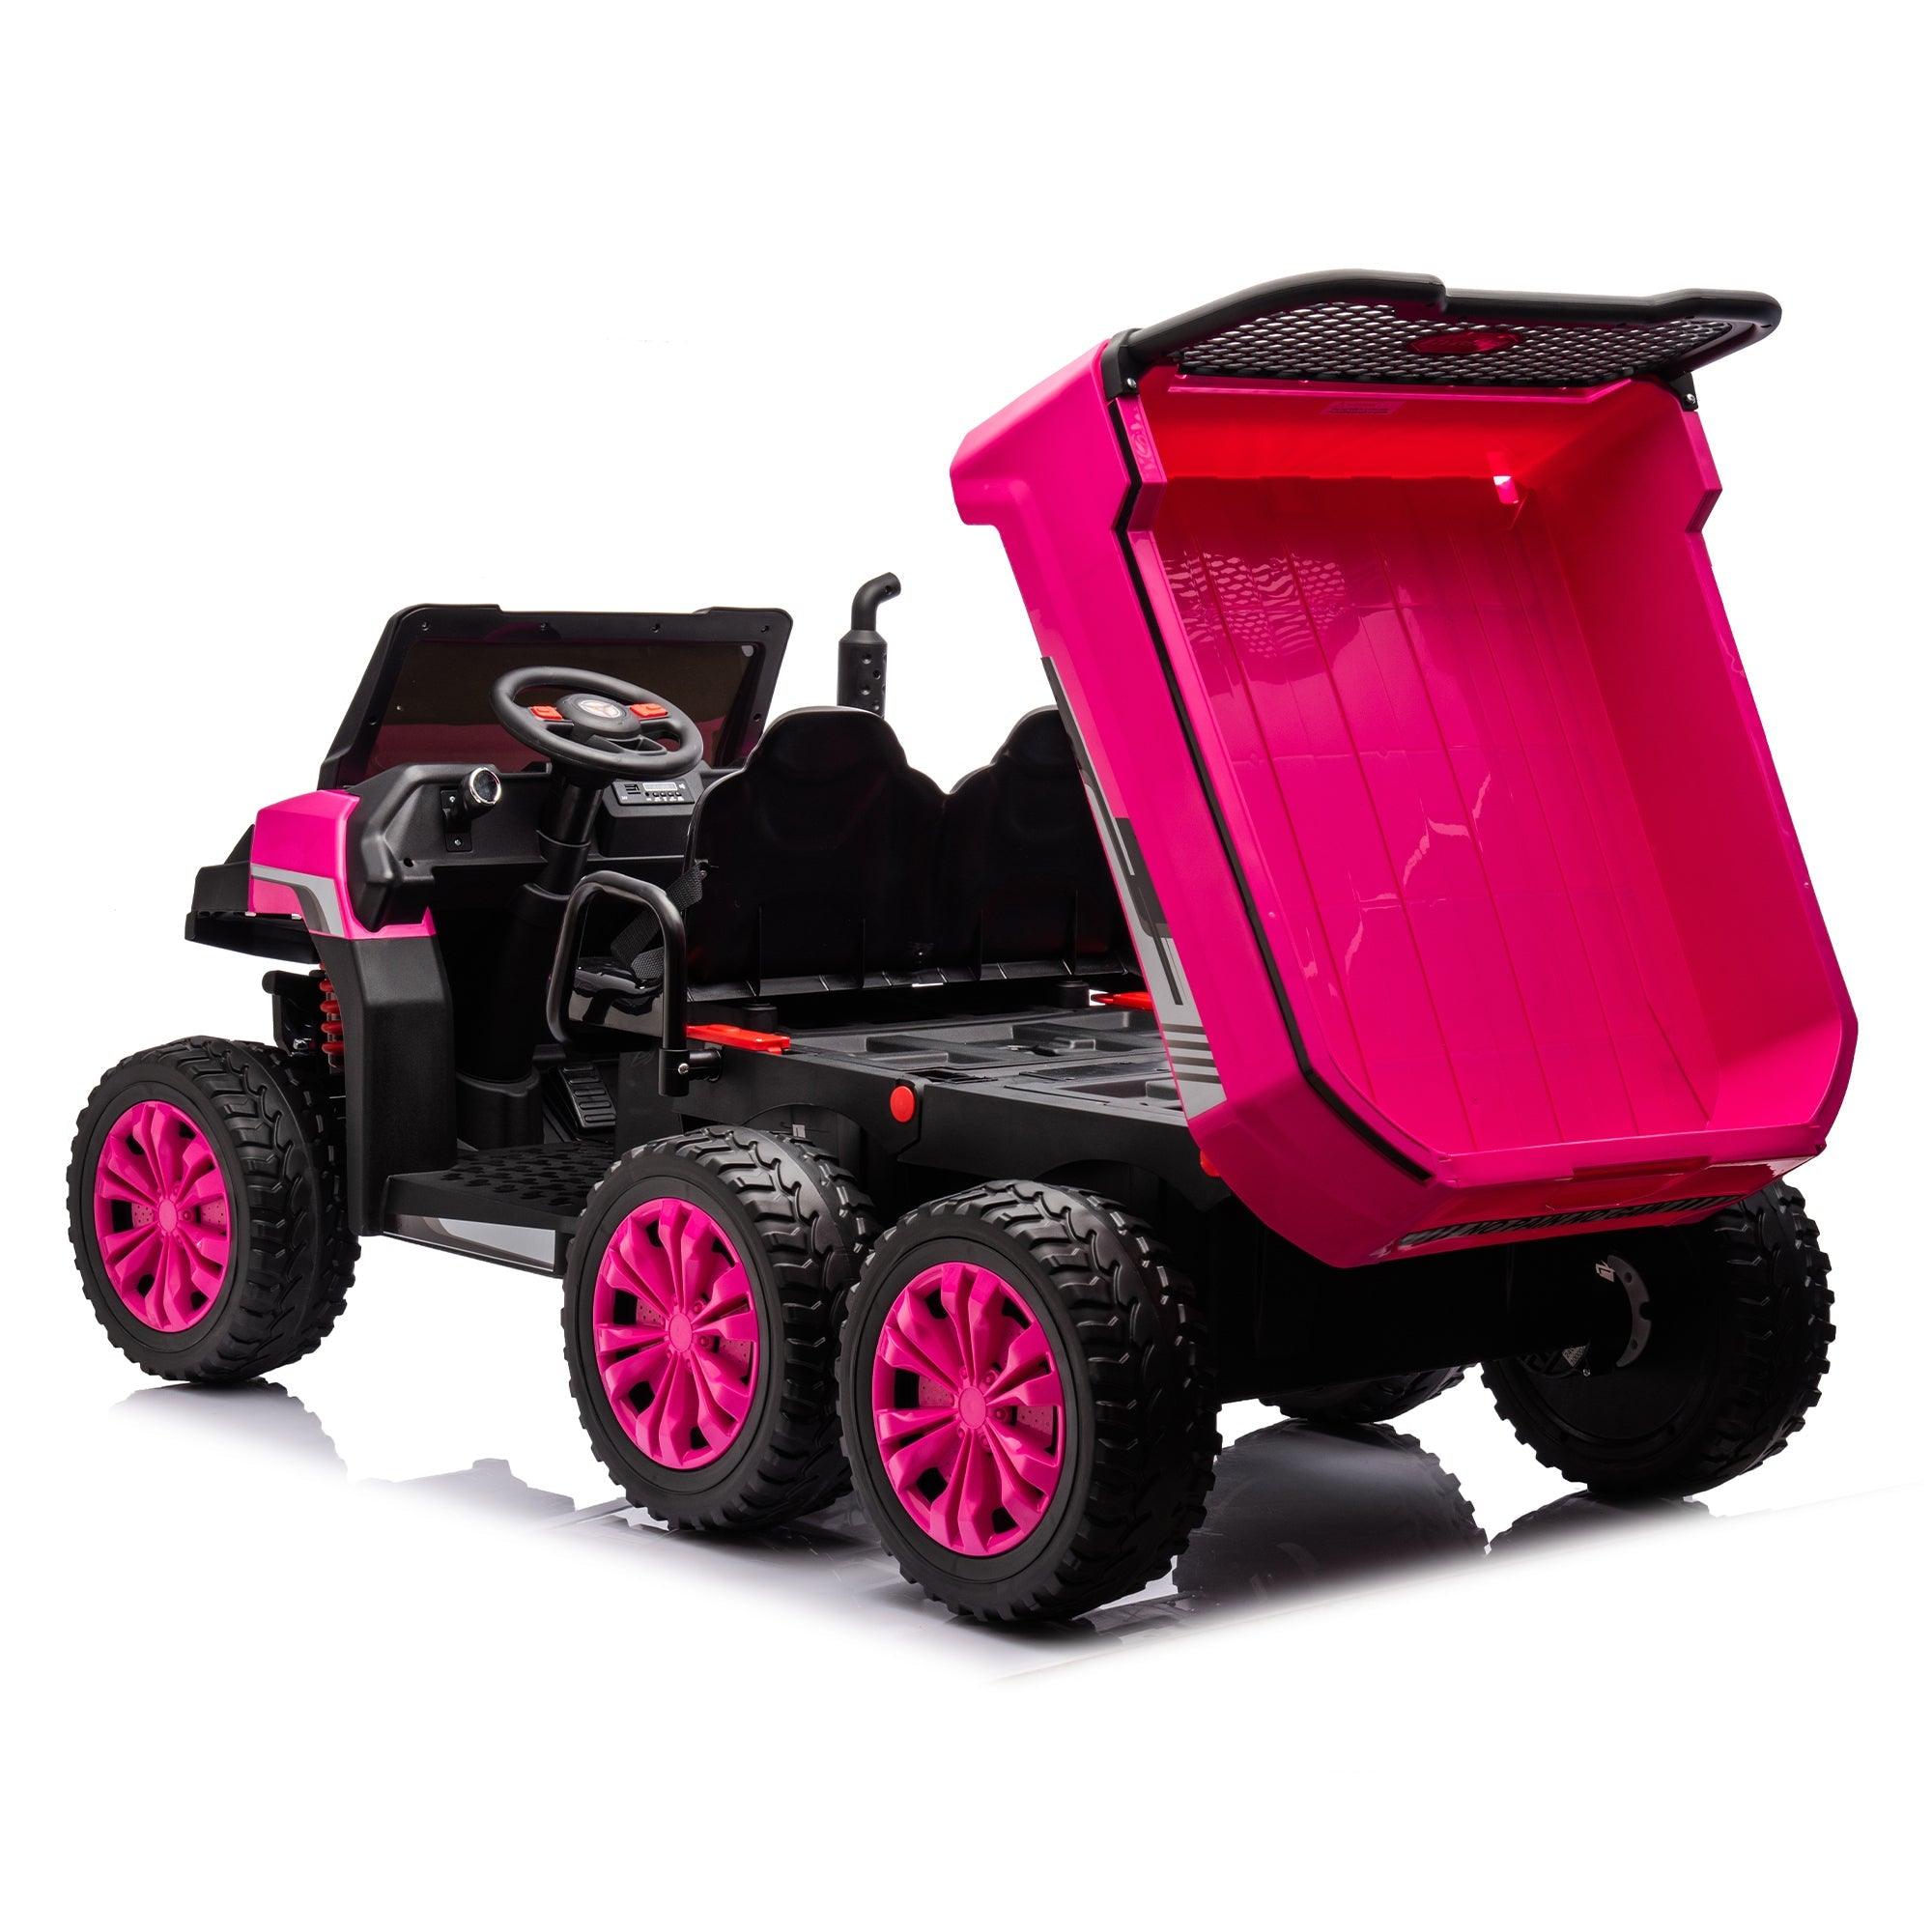 24V Kids 2-Seater UTV-XXL Ride On Truck With Dump Bed, 6 Wheels, Foam Tires, Suitable For Off-Roading, Remote Control LamCham